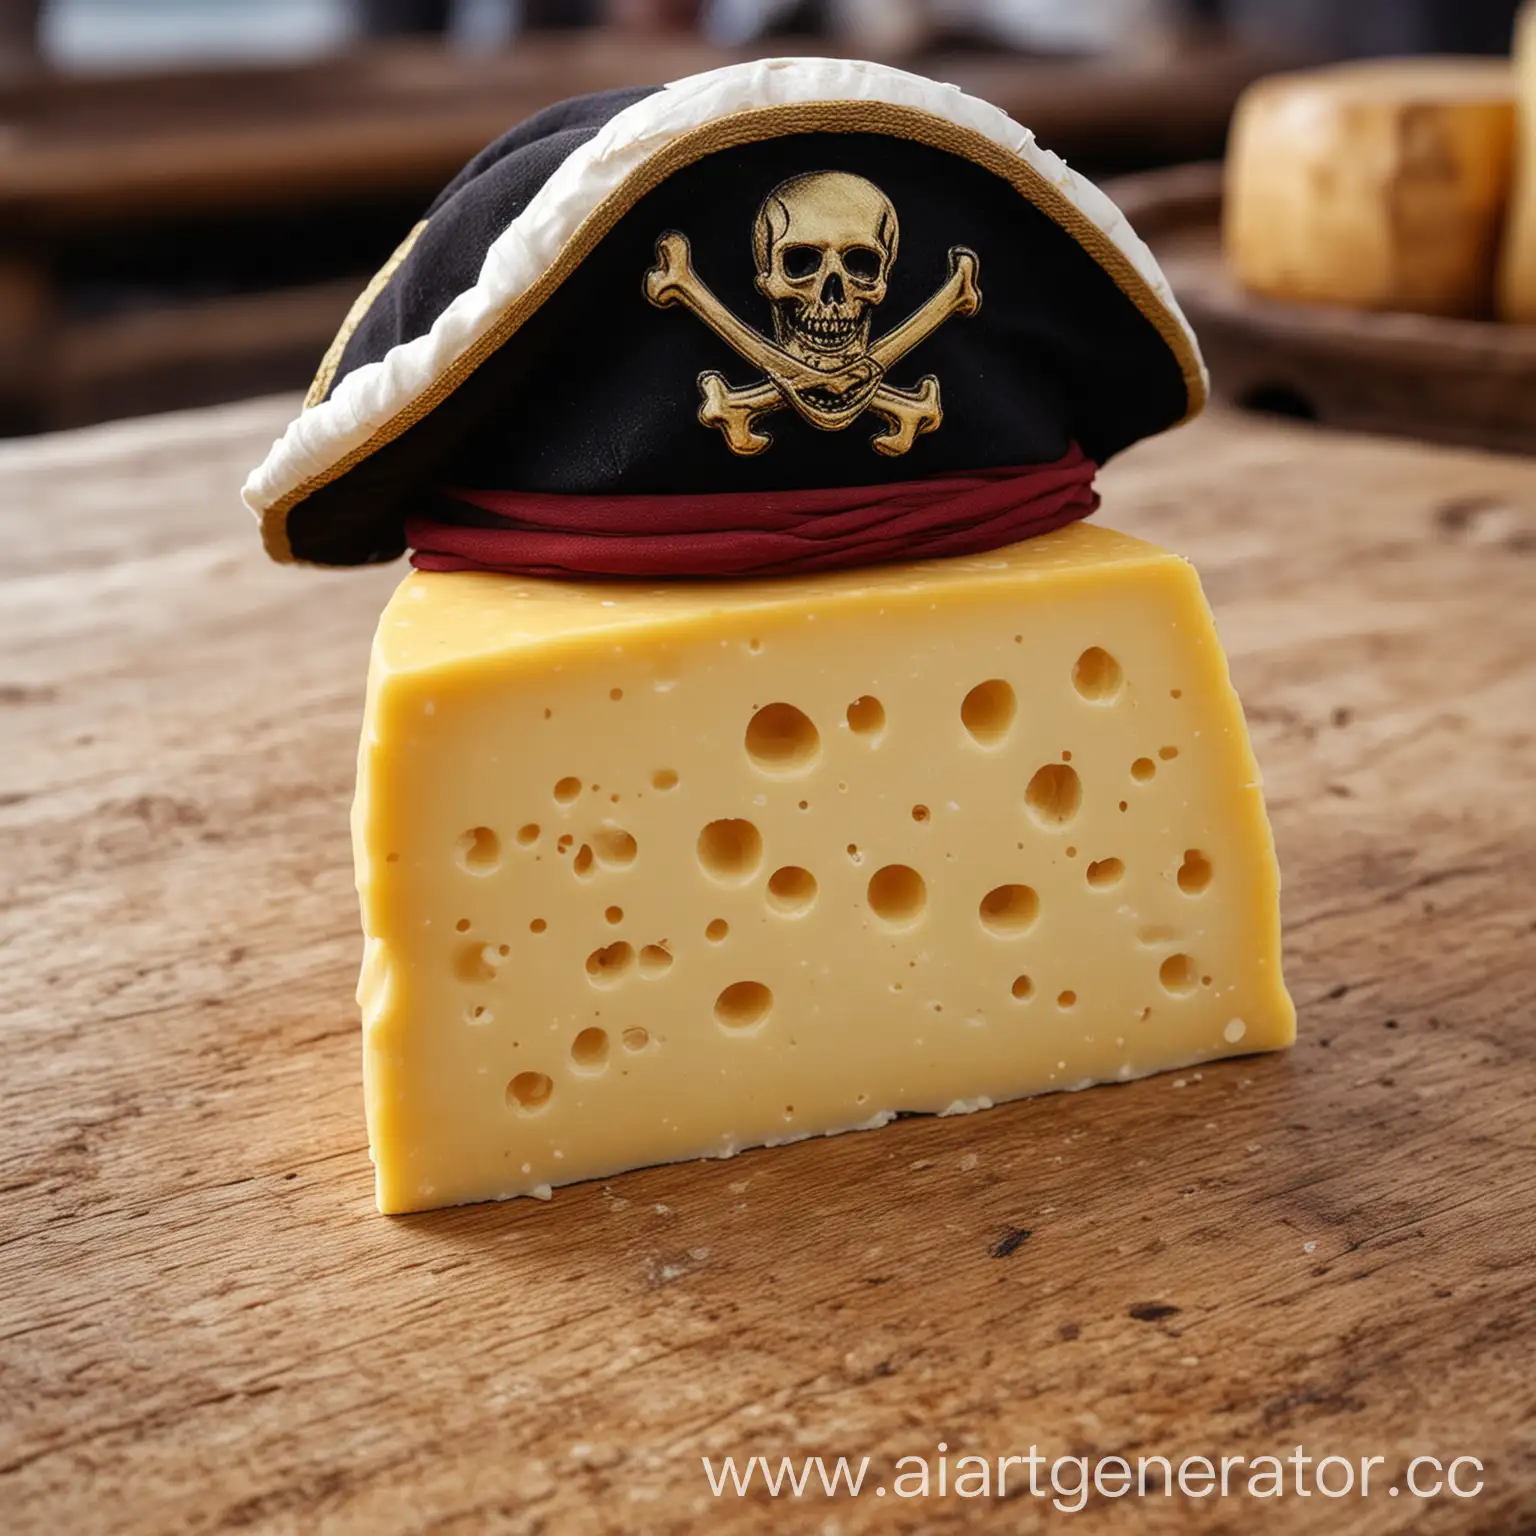 Pirate-Captains-Cap-Worn-on-Cheese